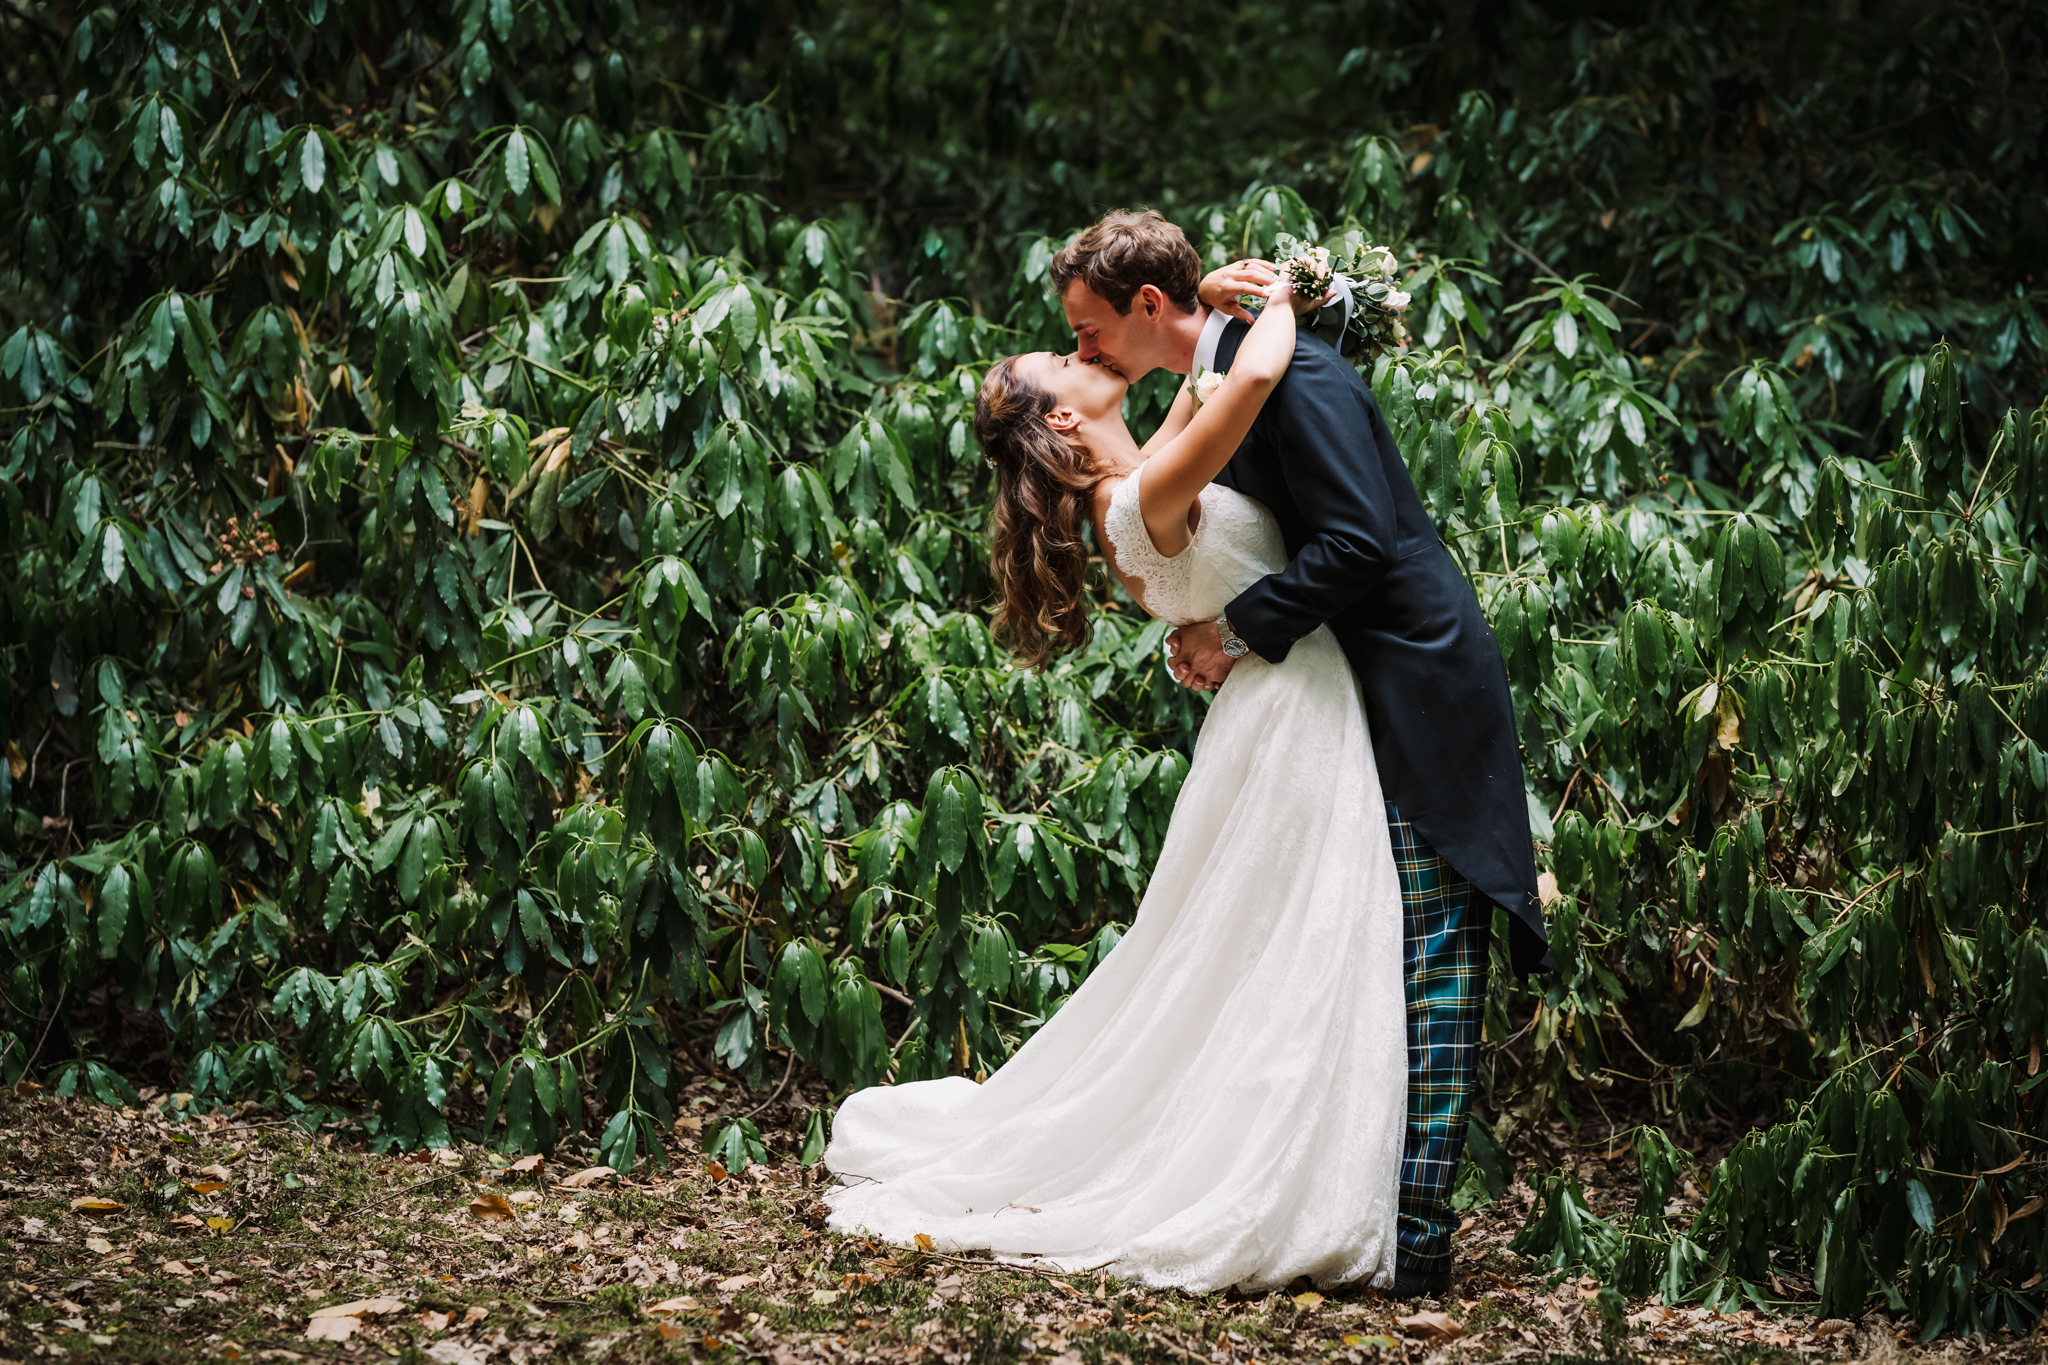 Woodland setting for bride and grooms first kiss after their wedding ceremony in hertfordshire